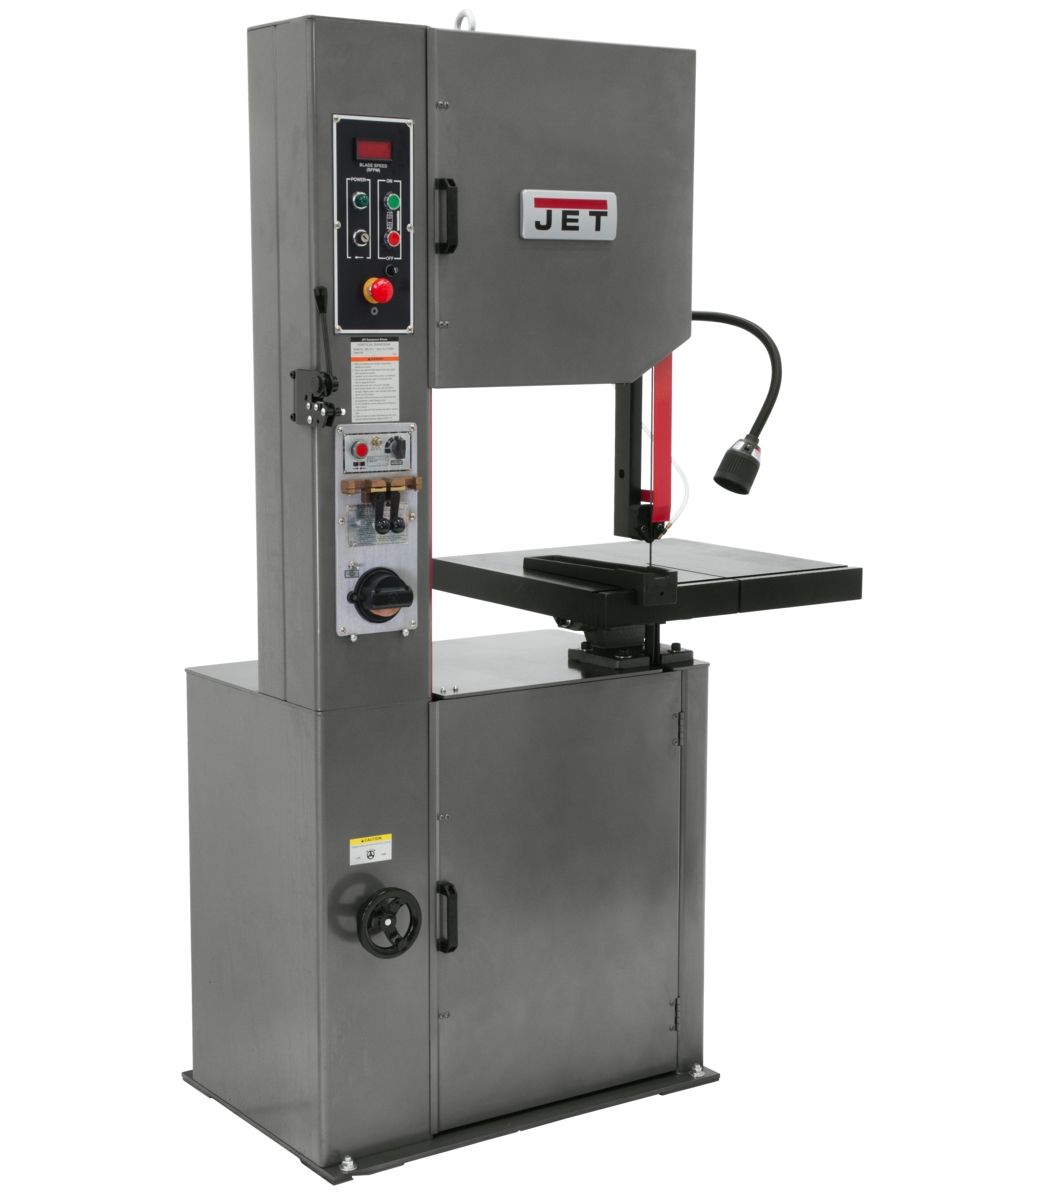 JET VBS-2012, 20" Vertical Band Saw